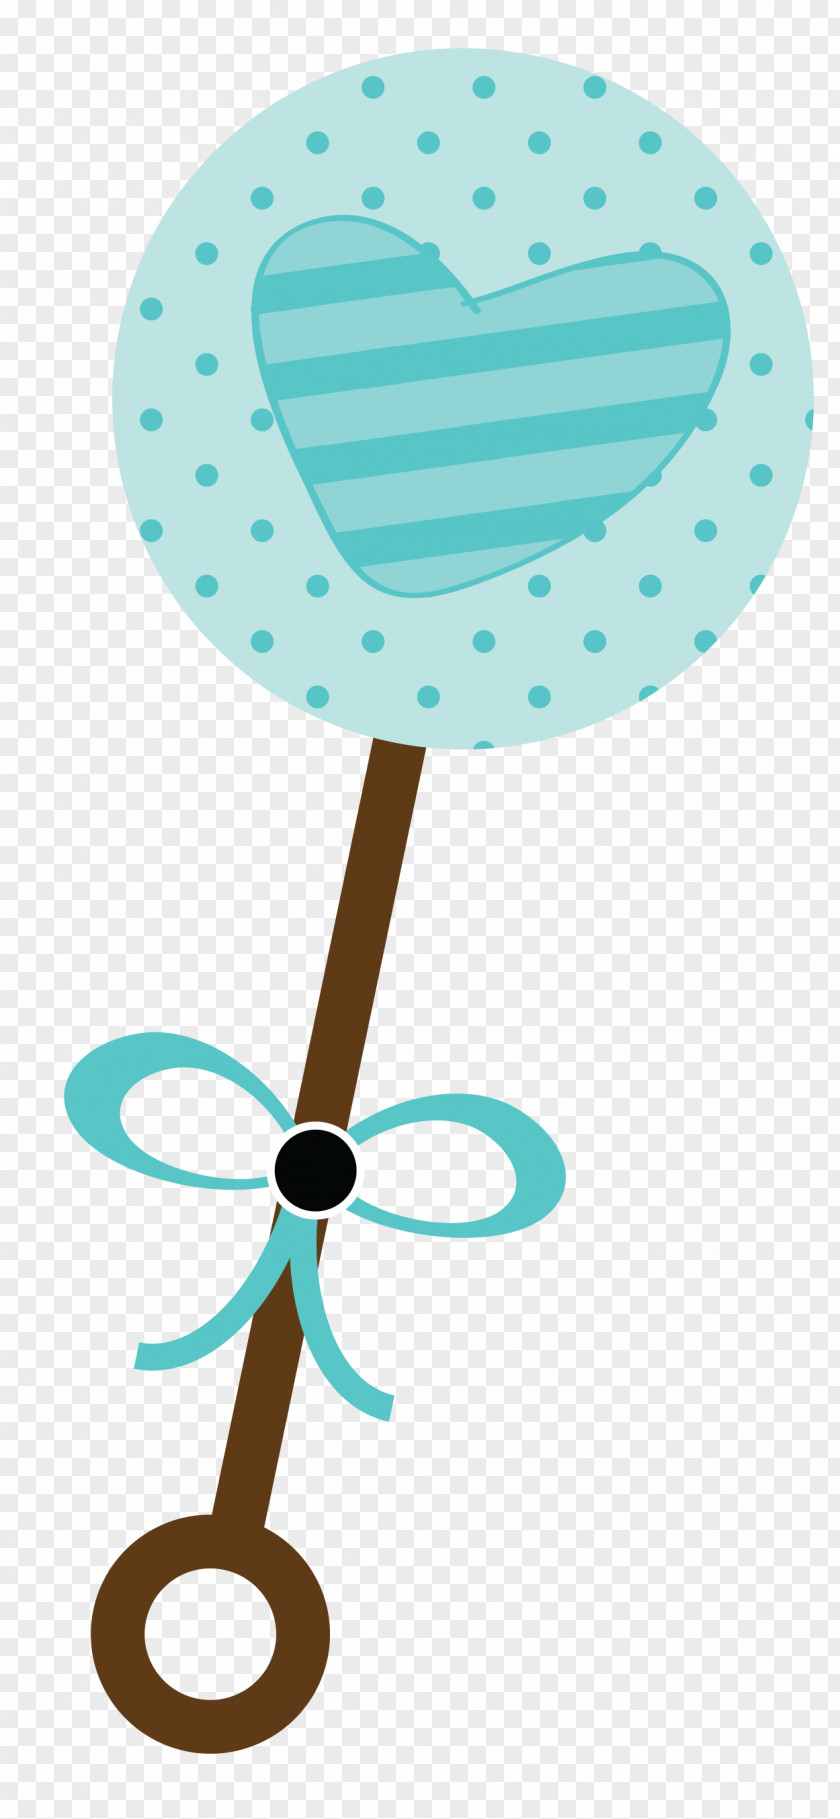 Toy Infant Baby Rattle Pacifier Clip Art PNG